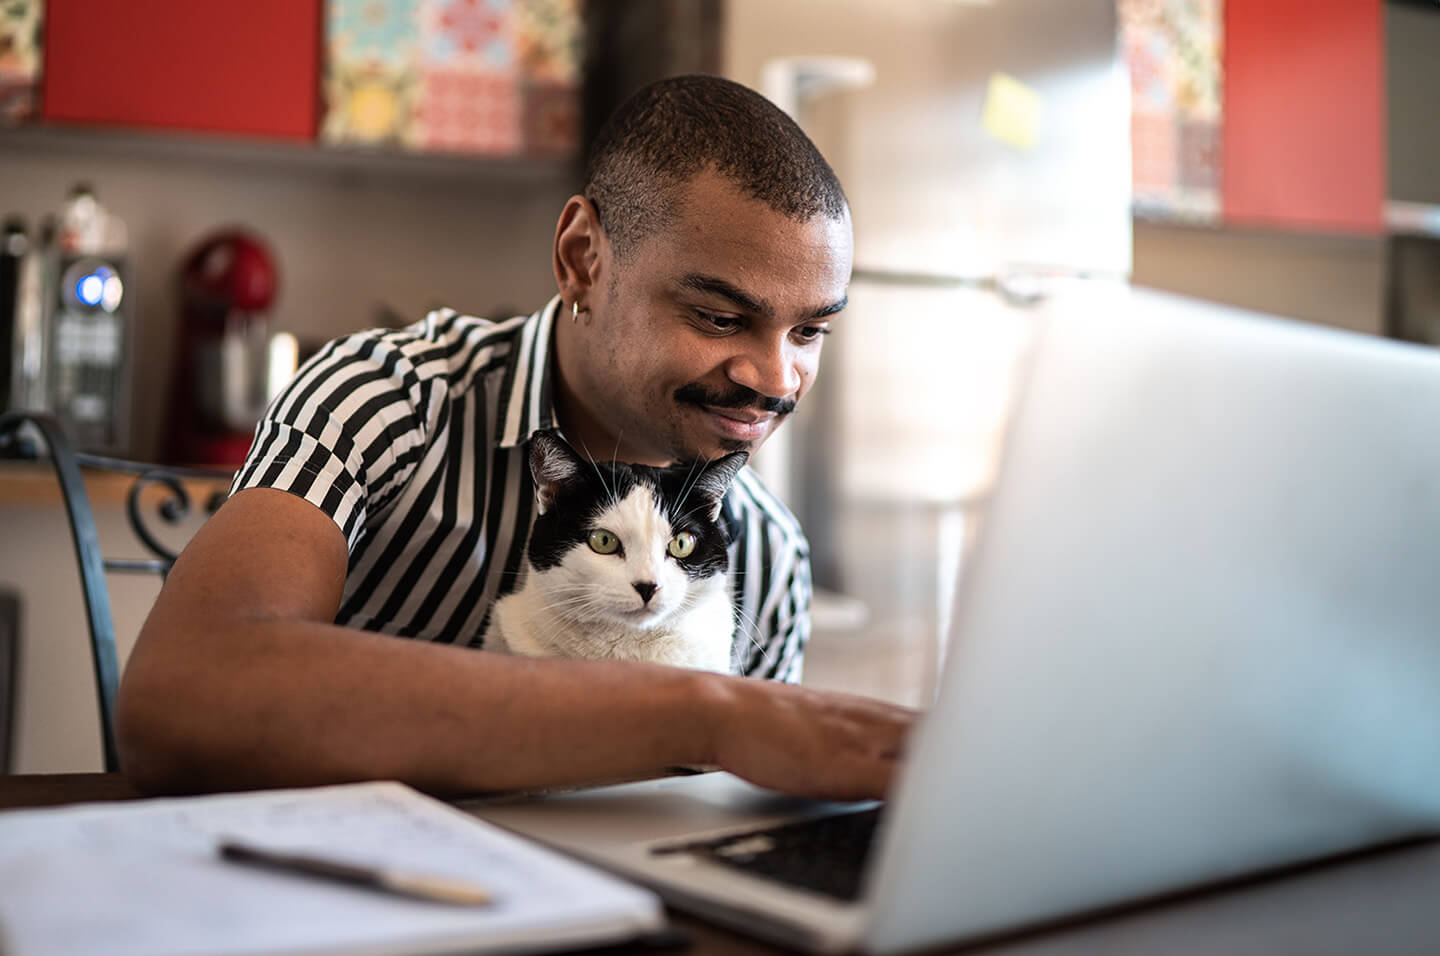 Man sitting at their kitchen table using a laptop with a cat on their lap. Credit: FG Trade